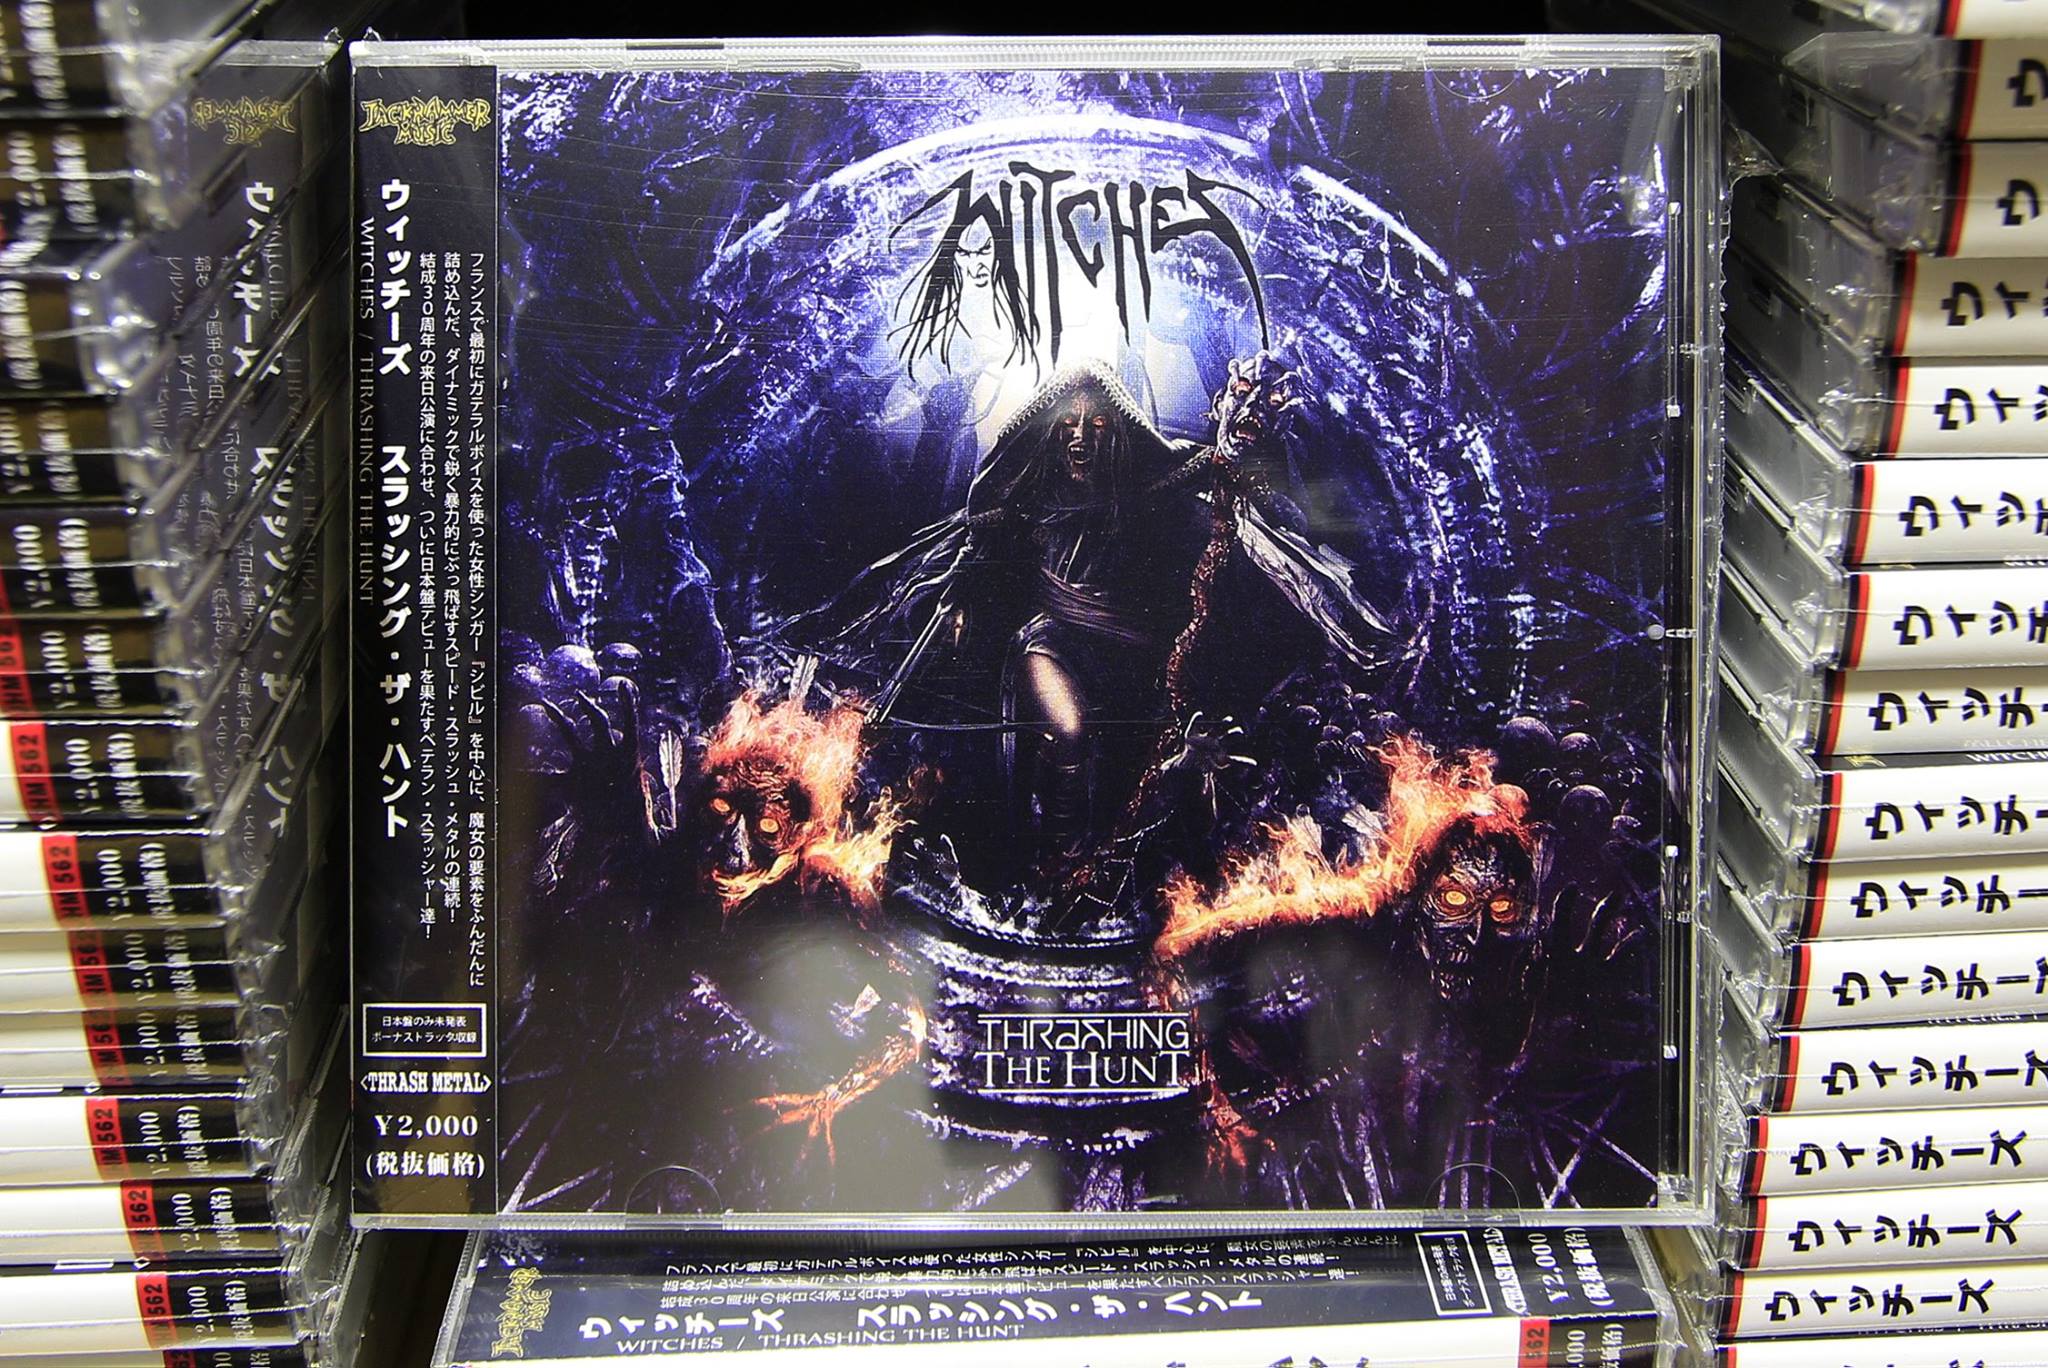 Witches Thrashing The Hunt CD Japanese Edition